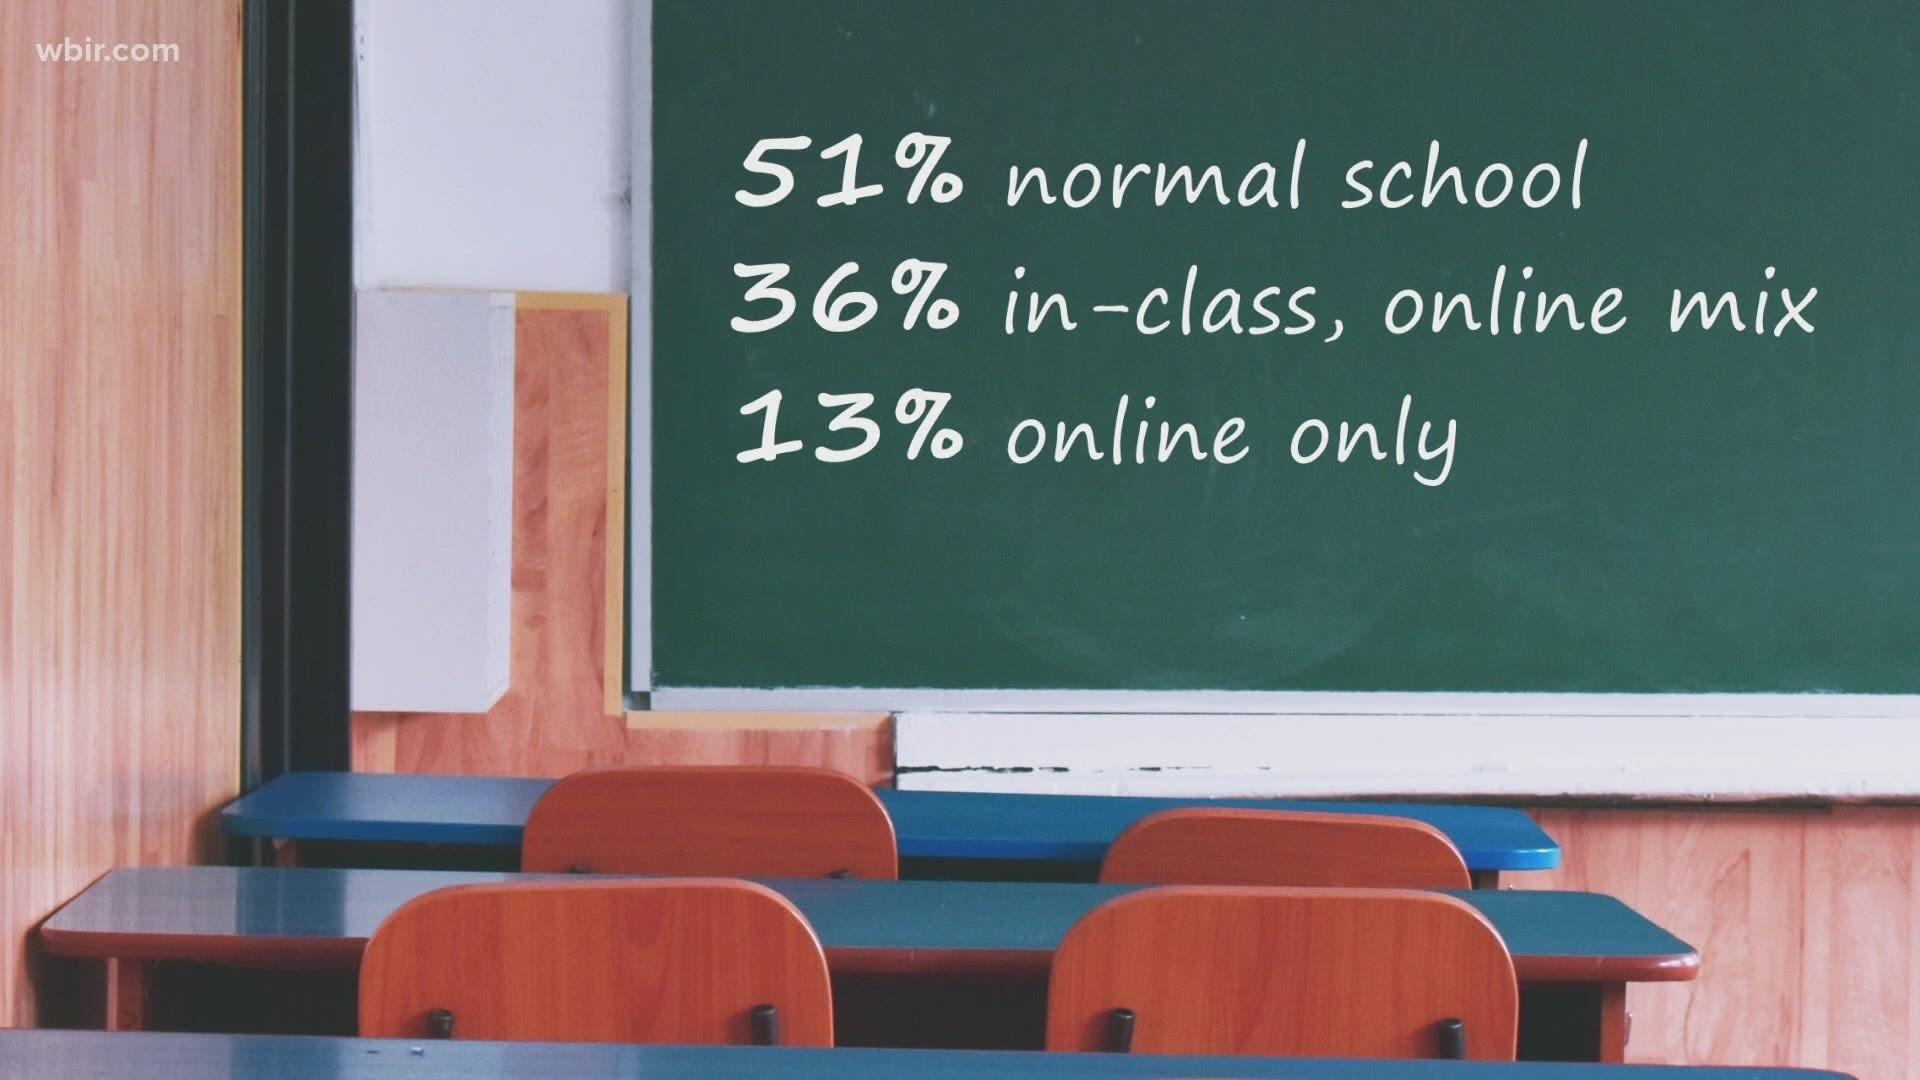 30,000 people took the Knox County Schools reopening survey online. About 51% want to return to in-person classes.